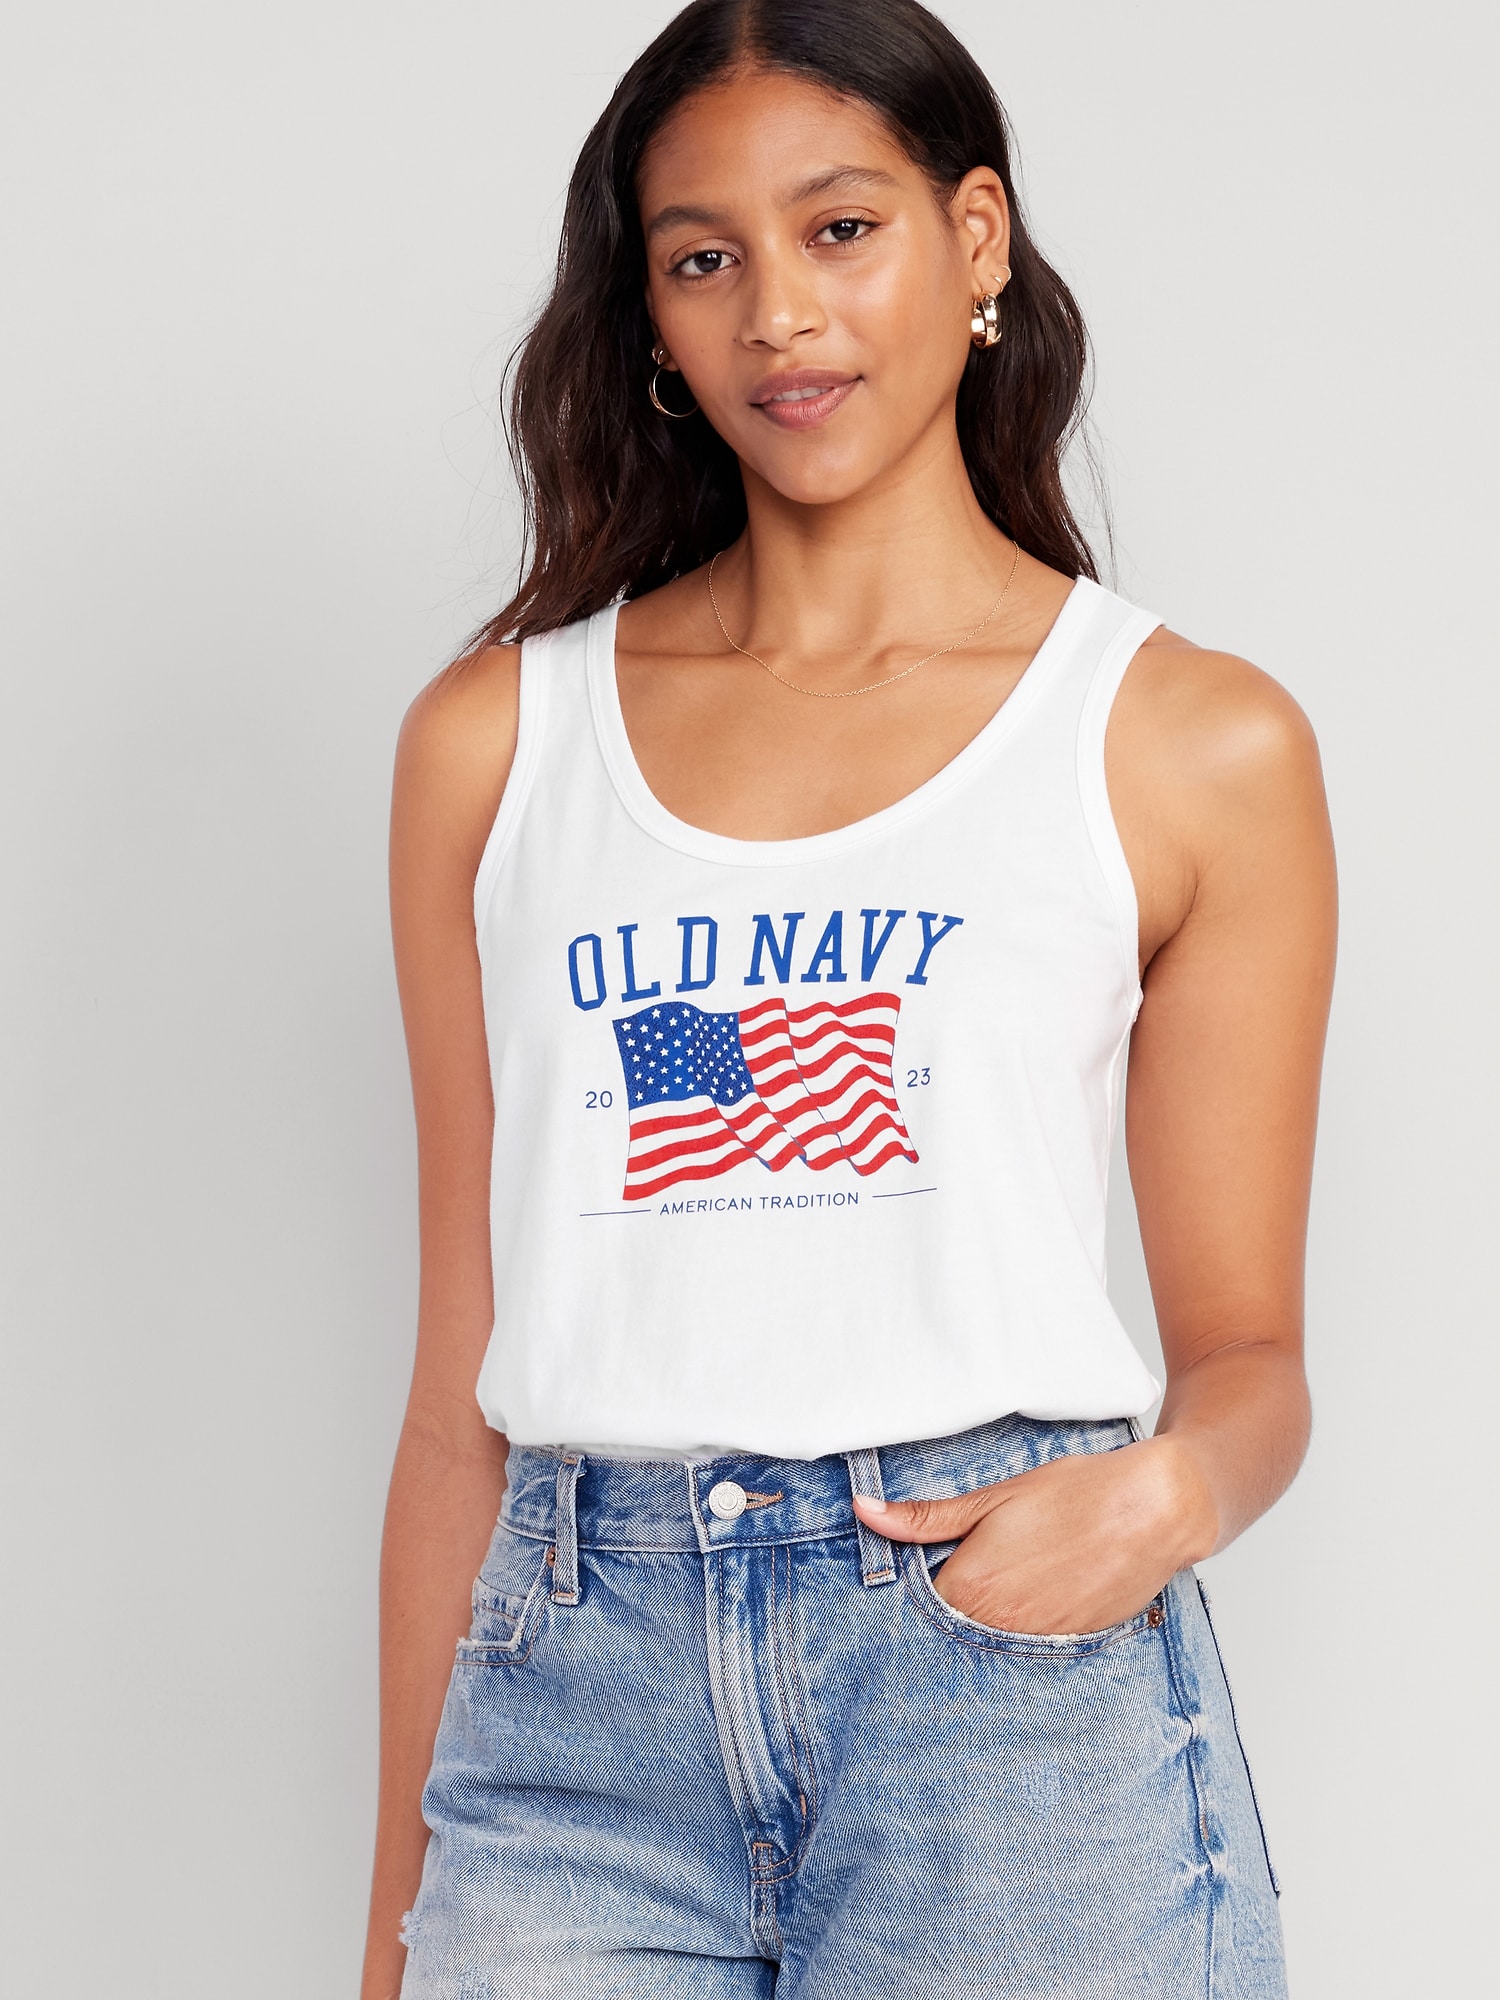 Move over Old Navy, Jane has got the best 4th of July tees this year! 😂  #linkinbio